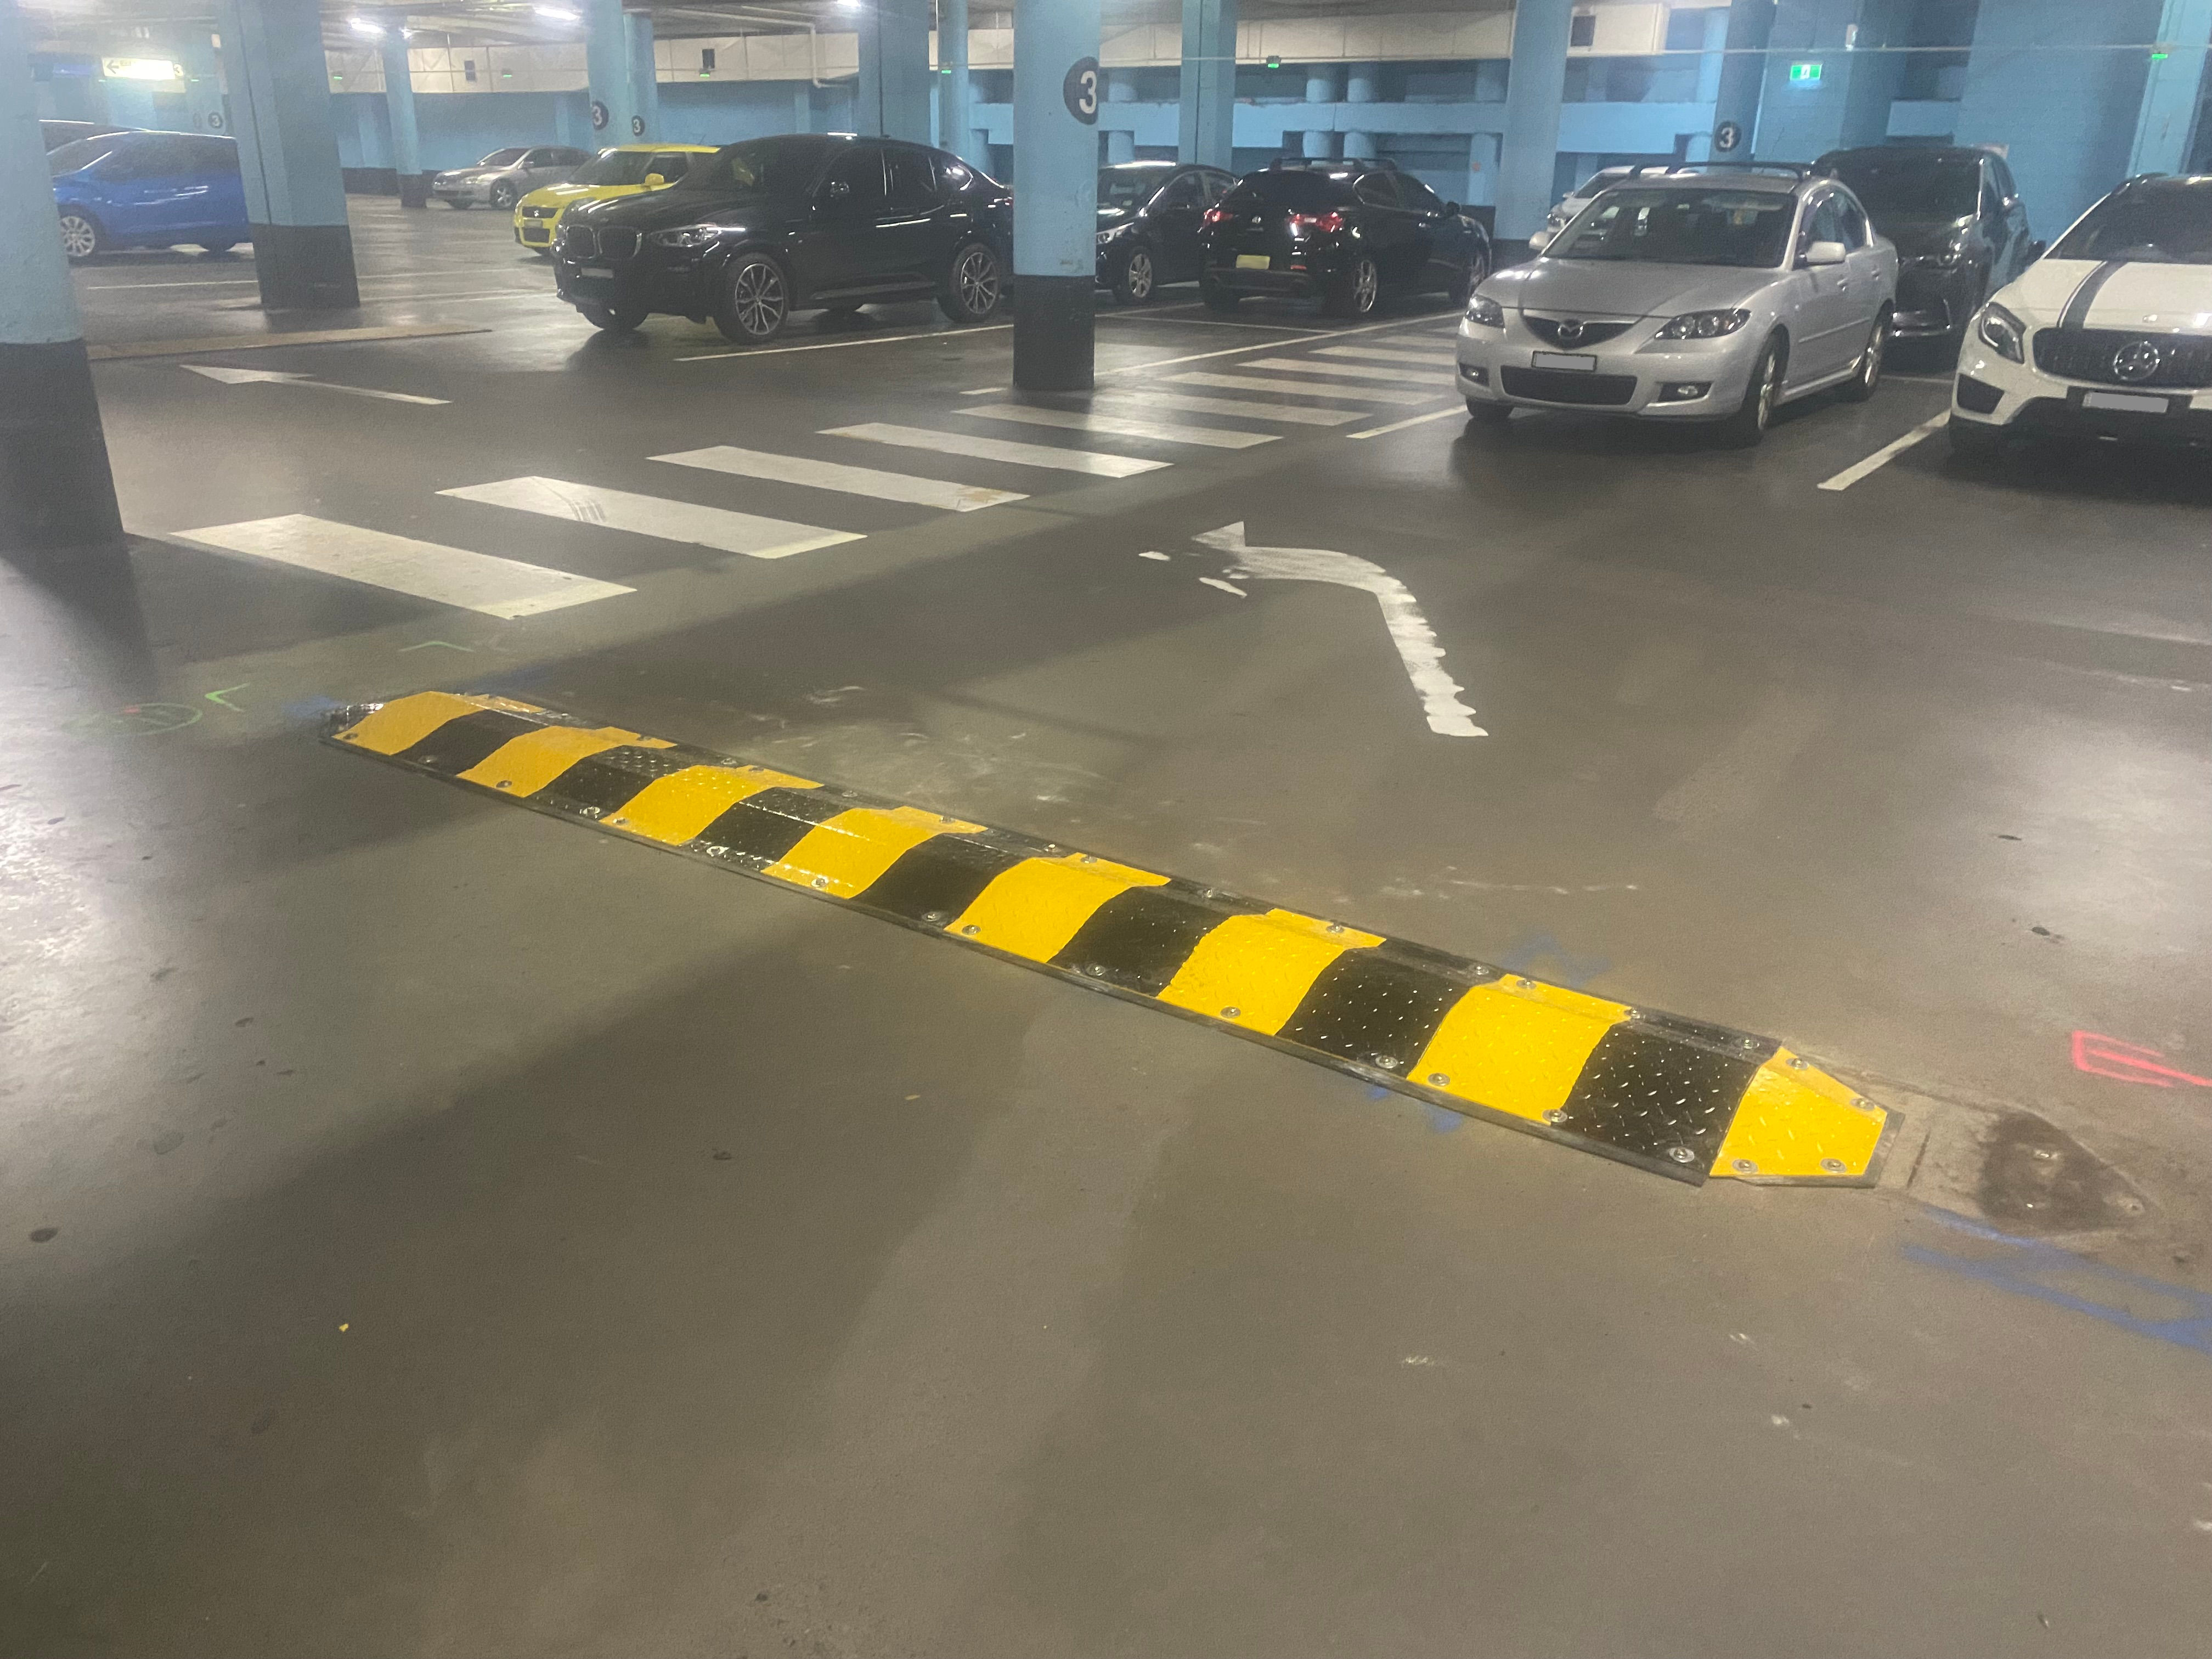 Steel speed humps installed on car park surface.